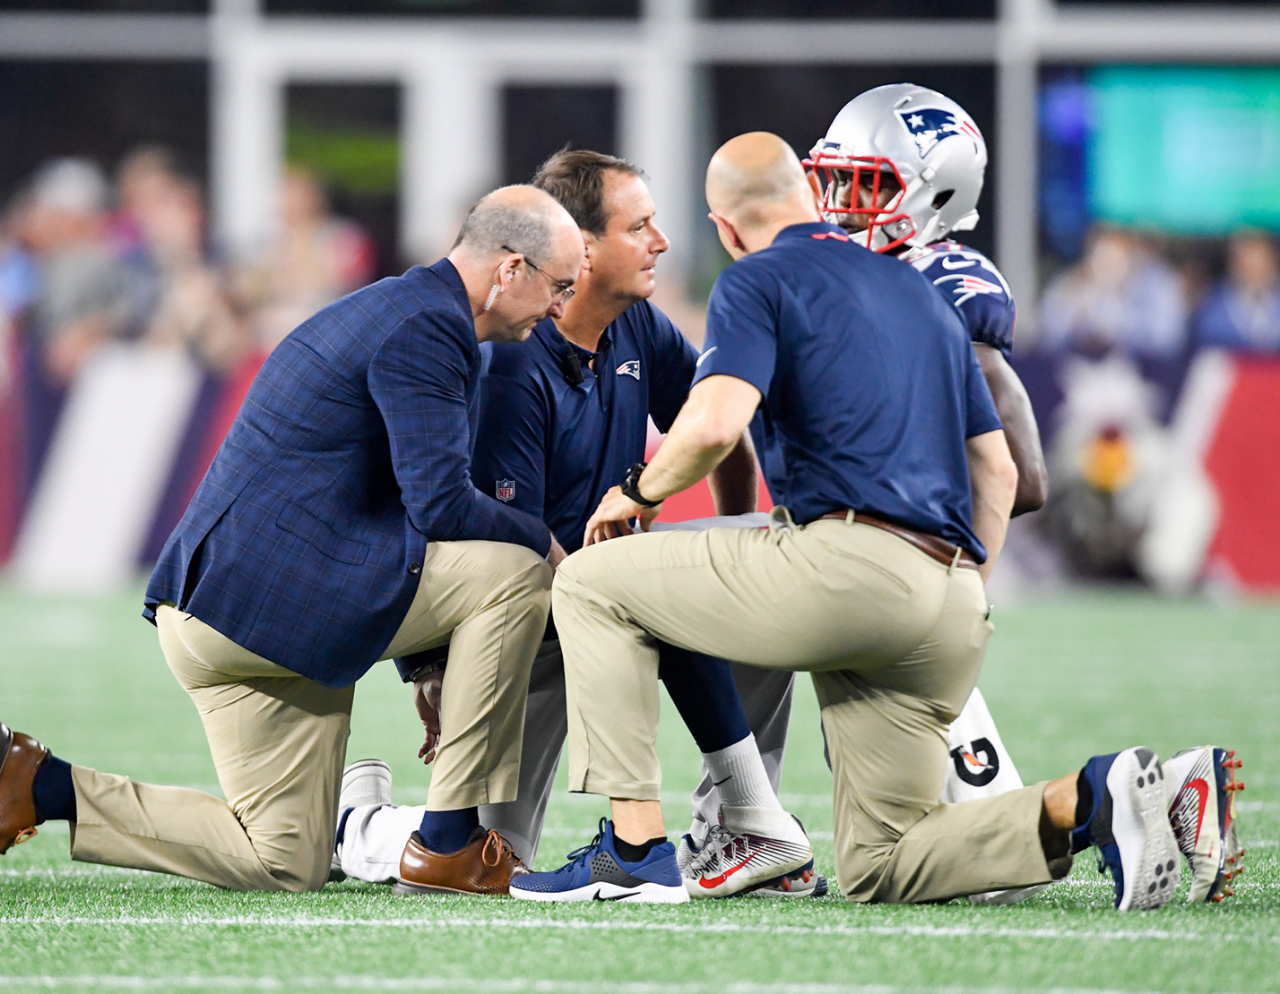 football player on field being examined by care team